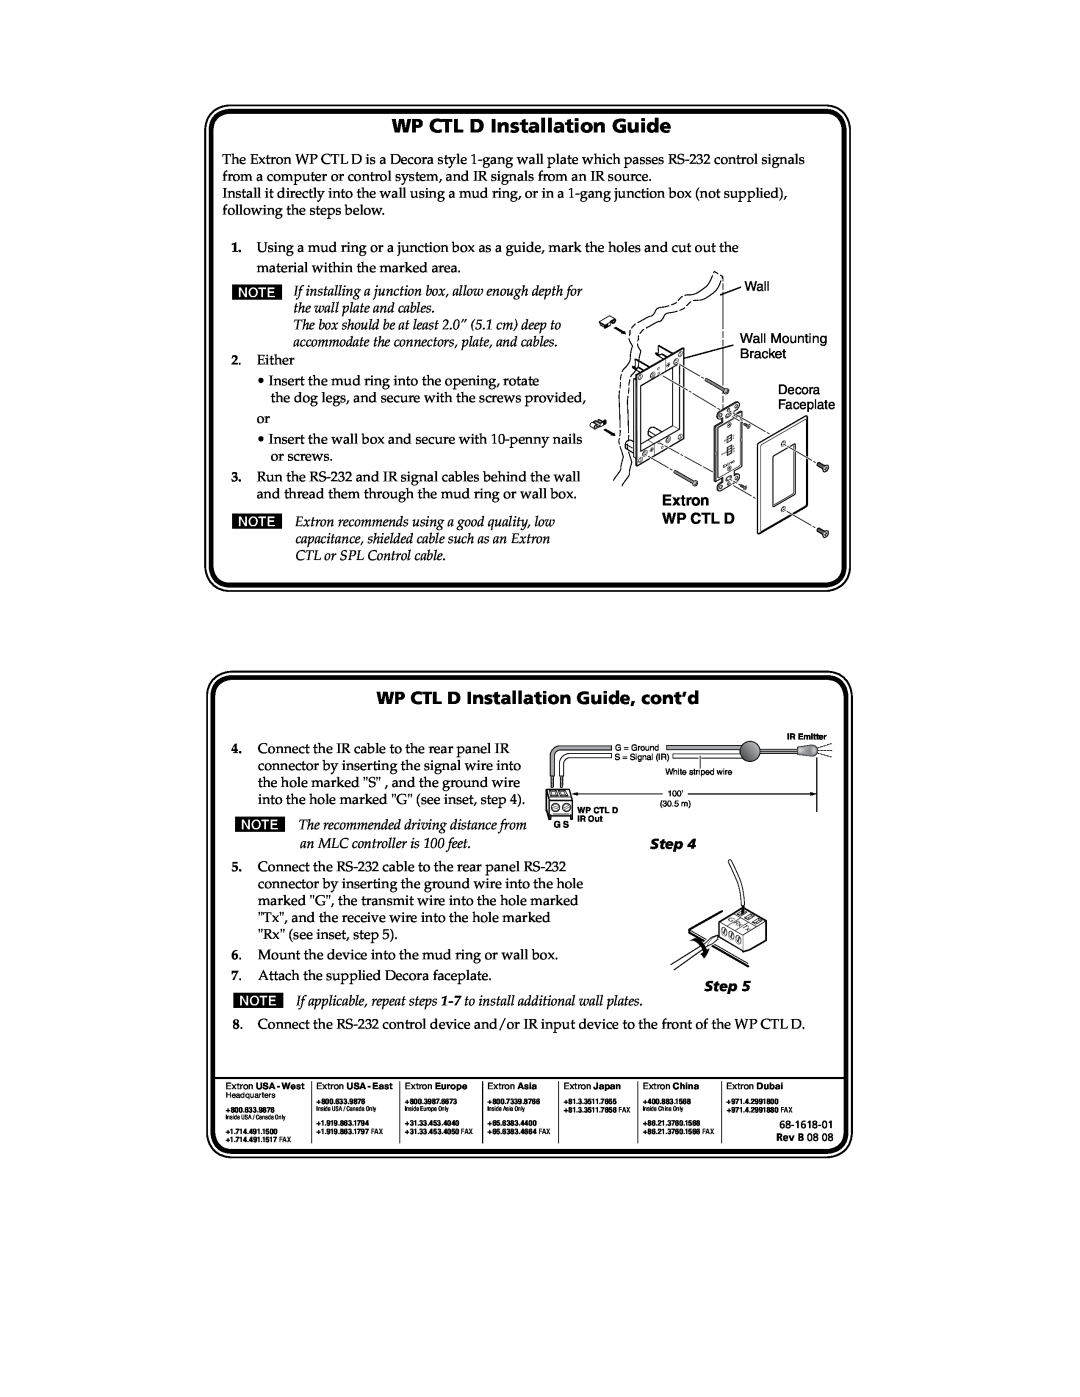 Extron electronic manual WP CTL D Installation Guide, cont’d, Extron WP CTL D, Step 